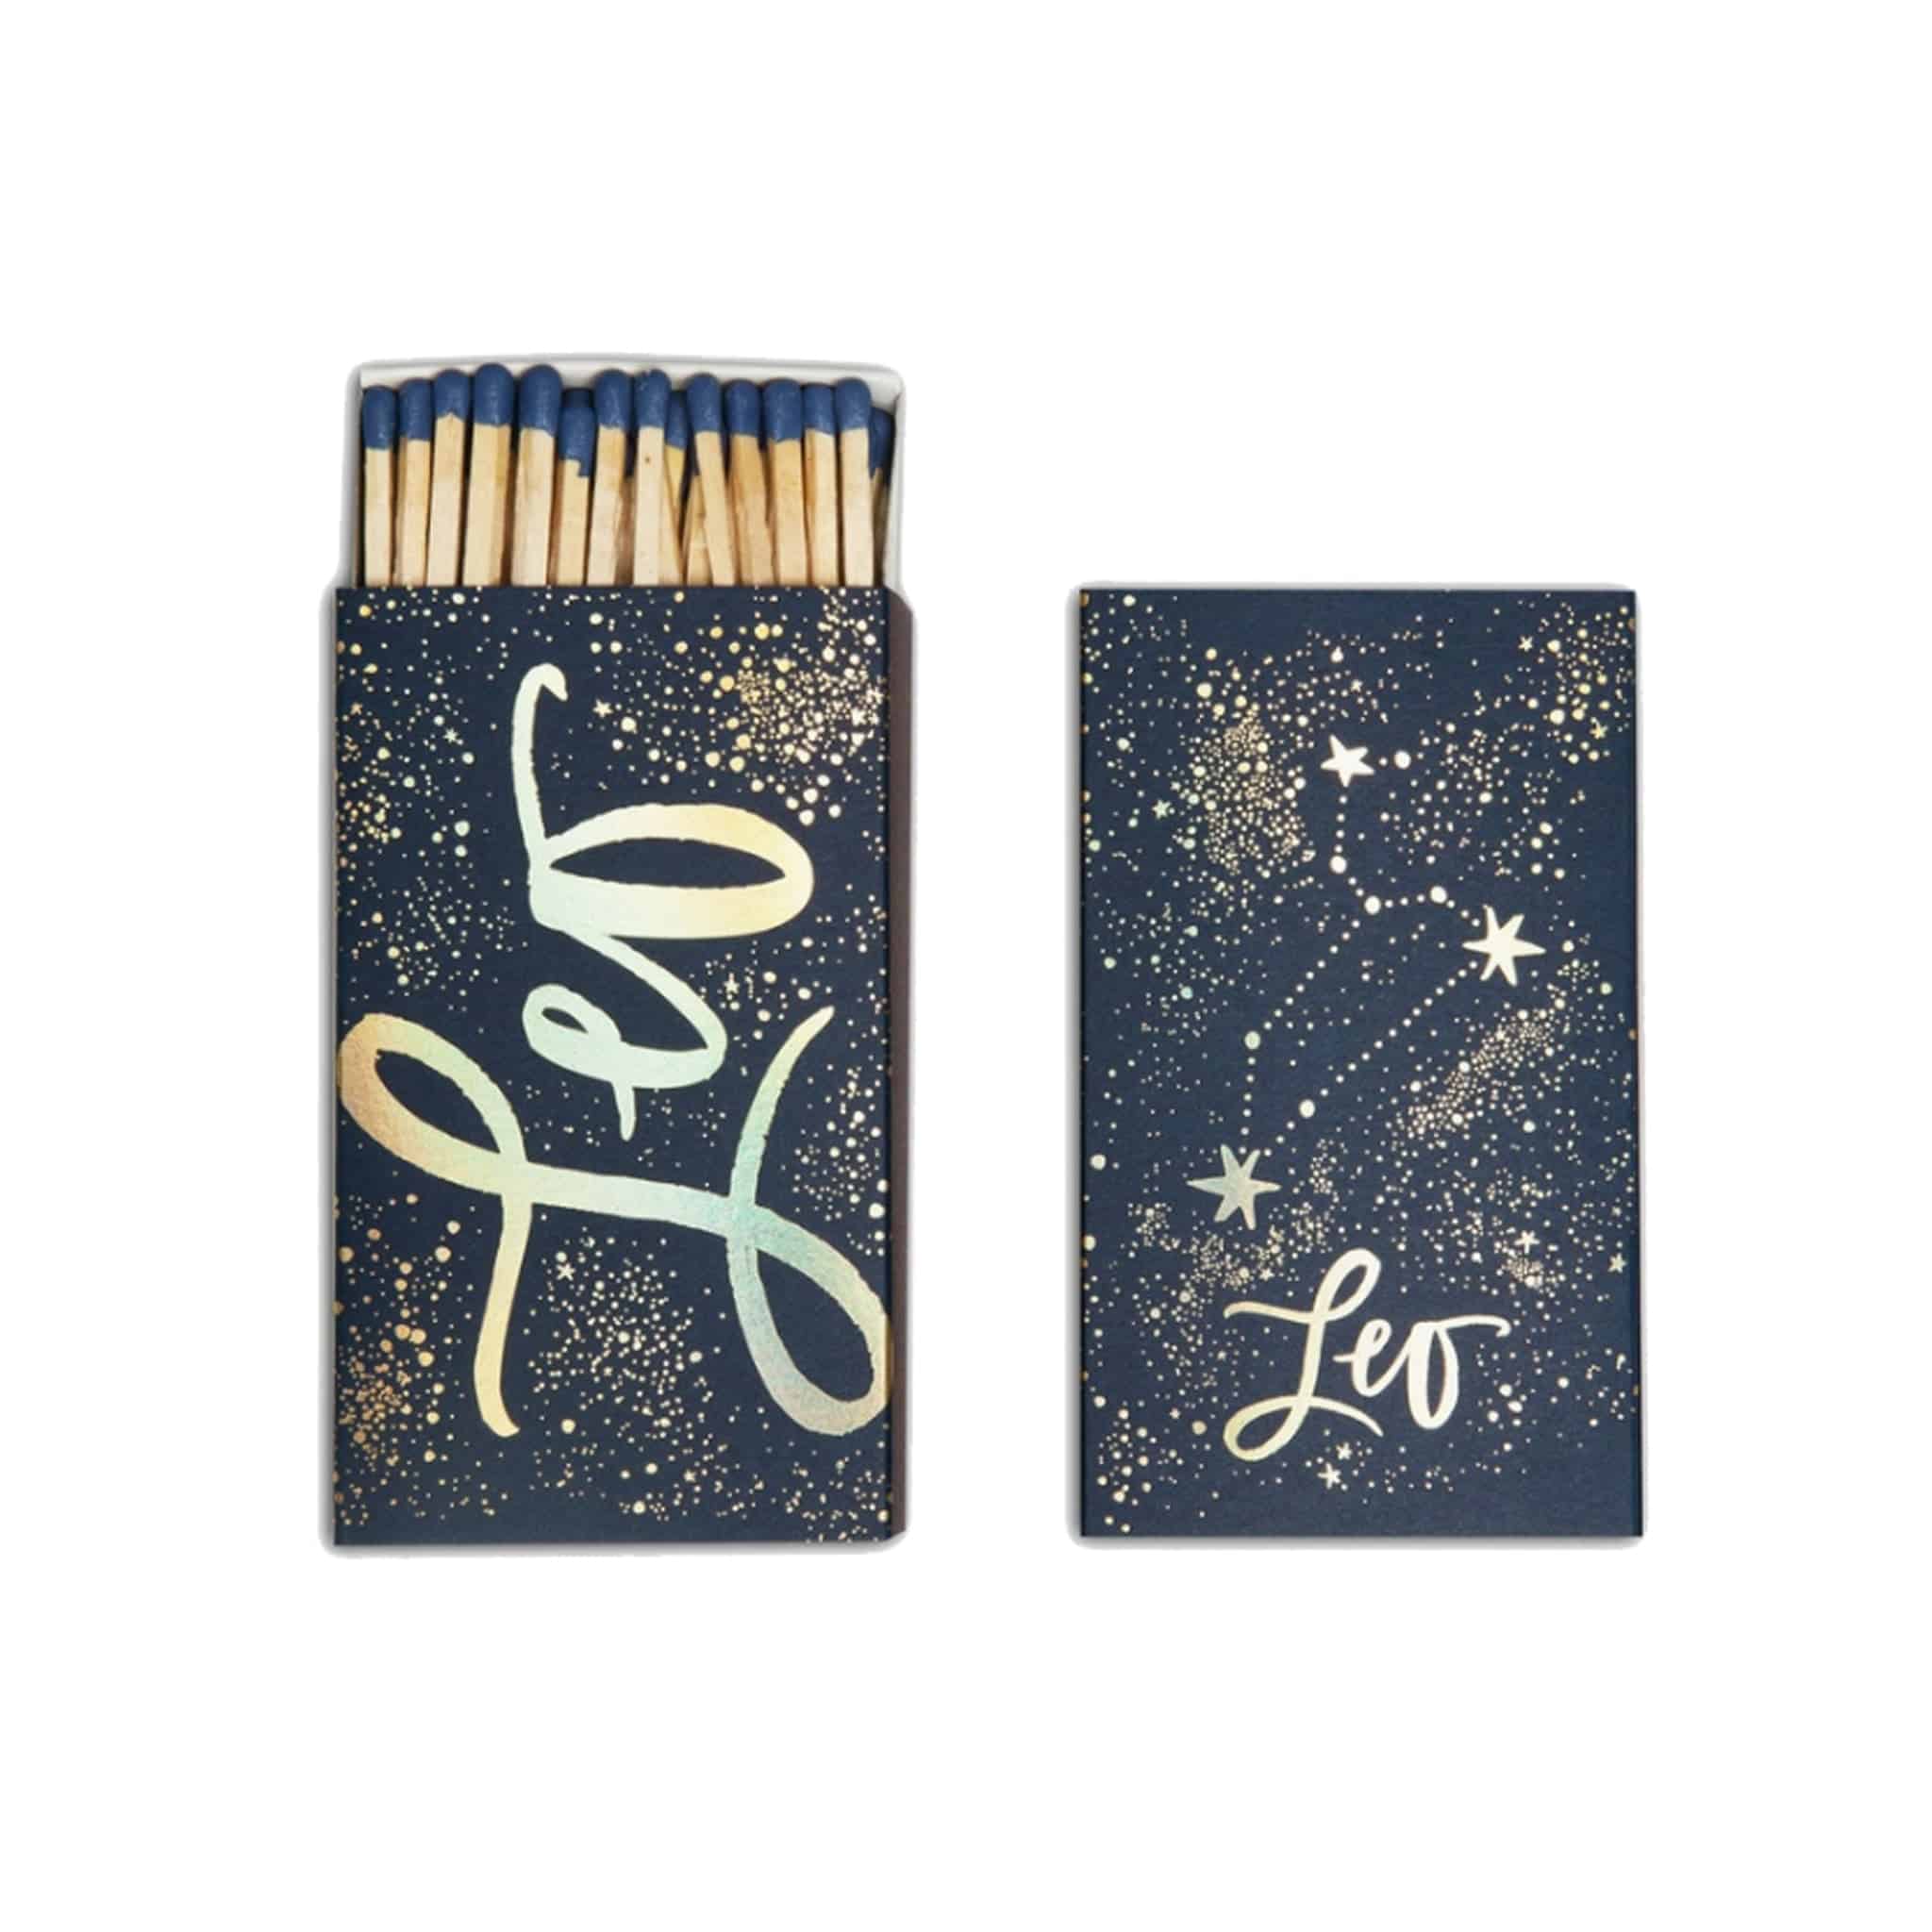 Leo Zodiac Matchbook - Extra Large 4.5" Cigar Matches - The Gilded Witch